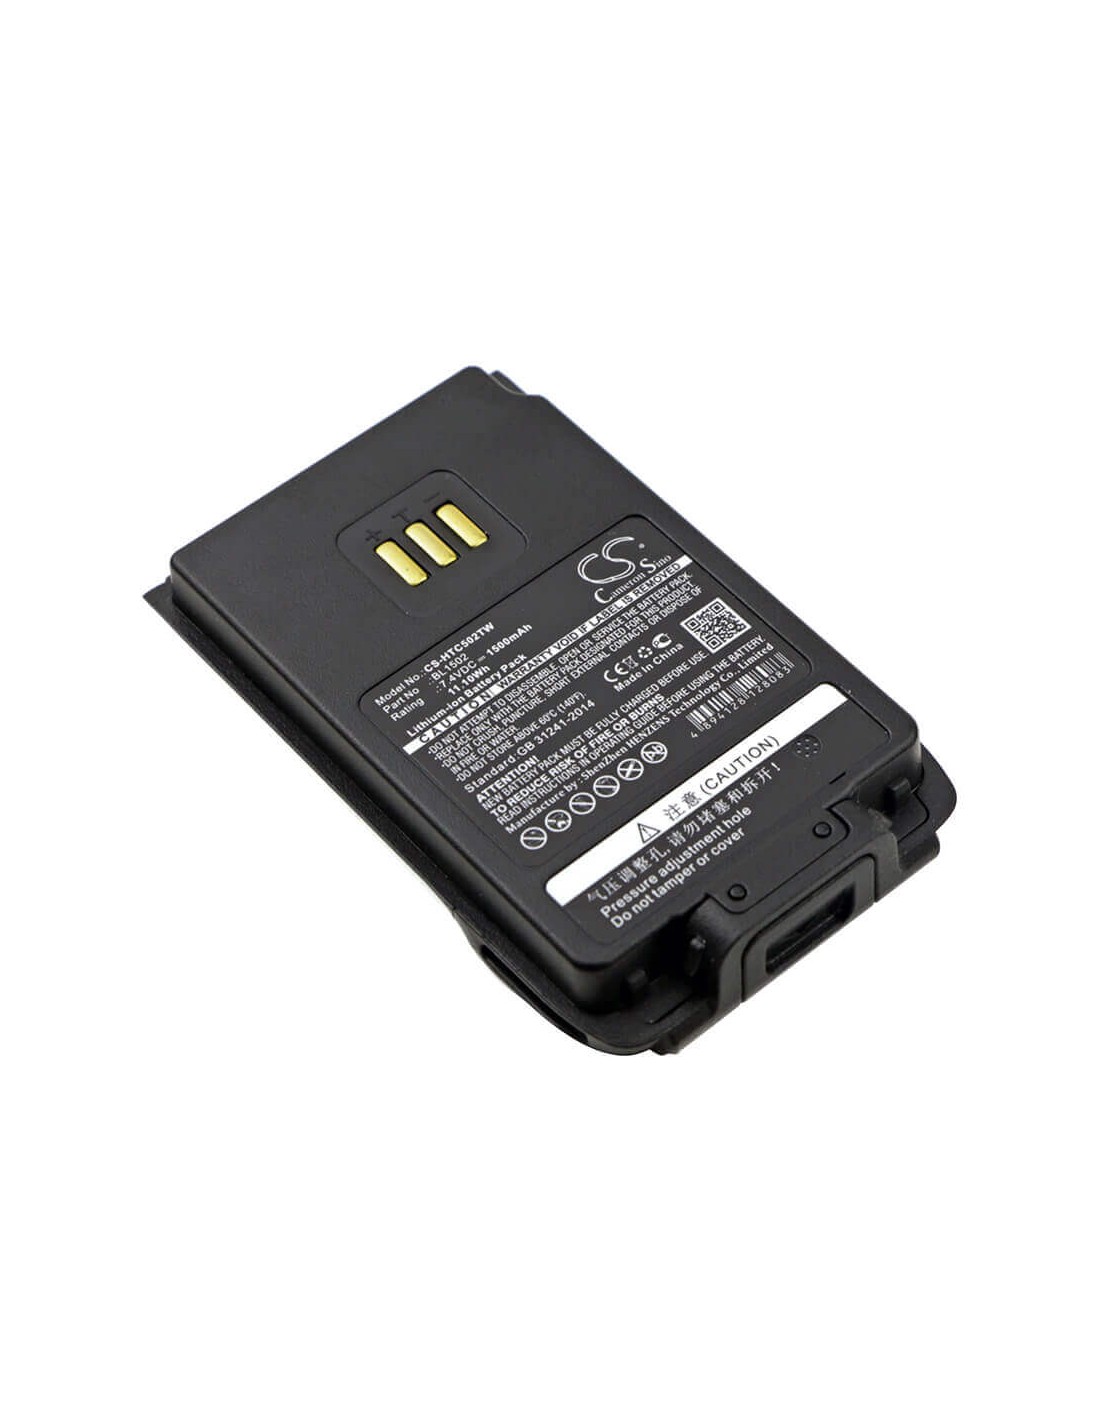 Battery for Hyt Pd502, Pd602, Pd500 7.4V, 1500mAh - 11.10Wh